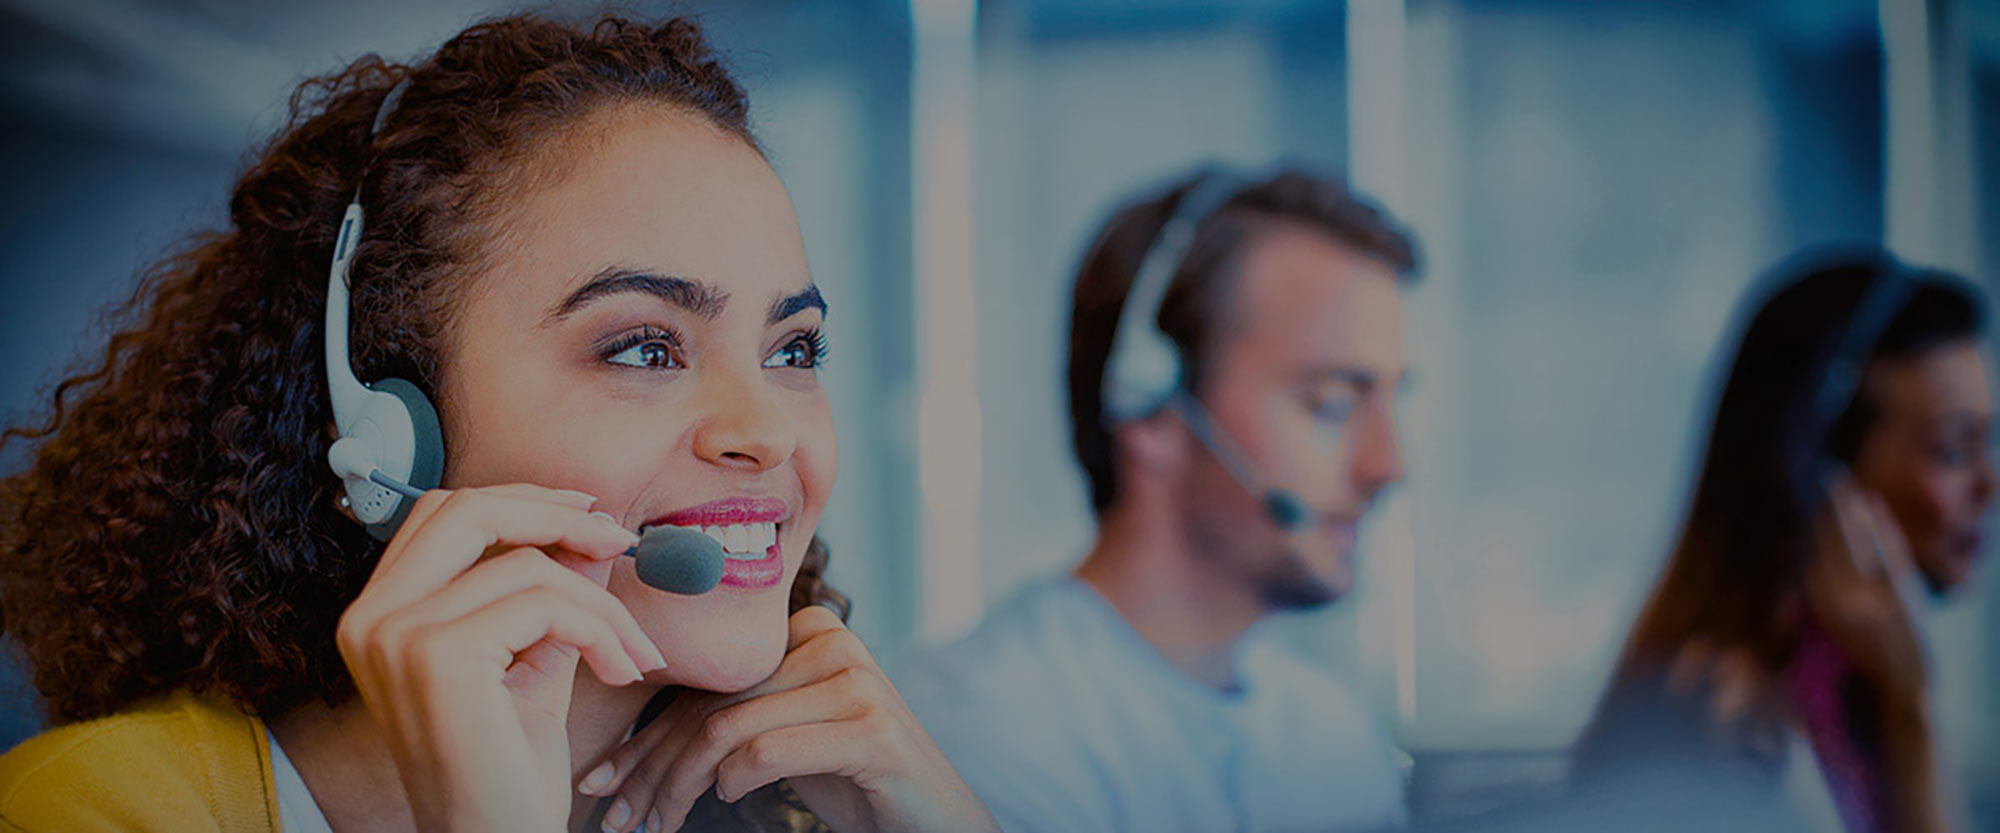 Phone representatives assist customers with the NorthText comprehensive SMS support platform